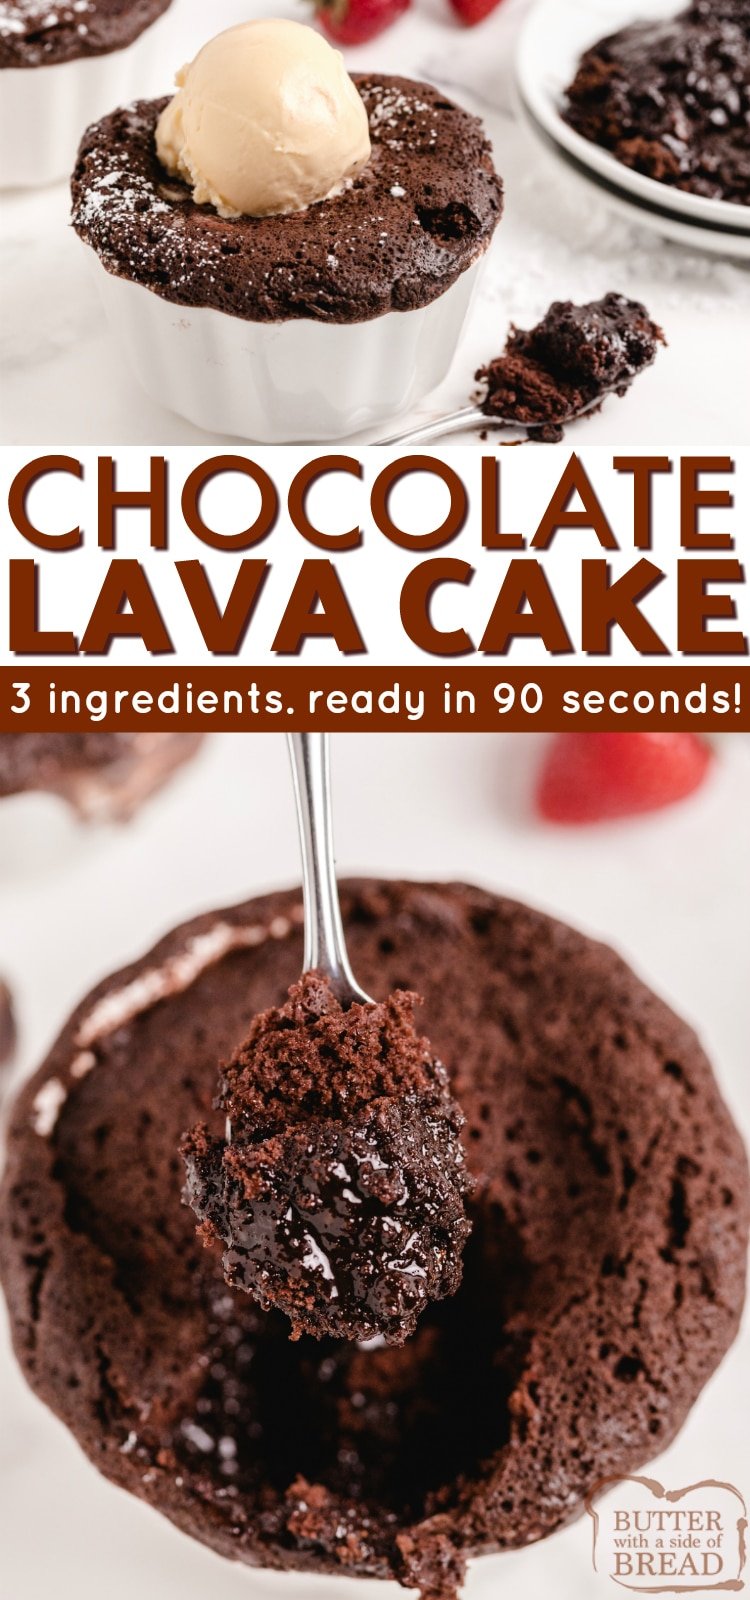 90 Second Chocolate Lava Cake made with 3 ingredients in less than 2 minutes. Fastest chocolate cake recipe ever with a molten lava fudge filling!